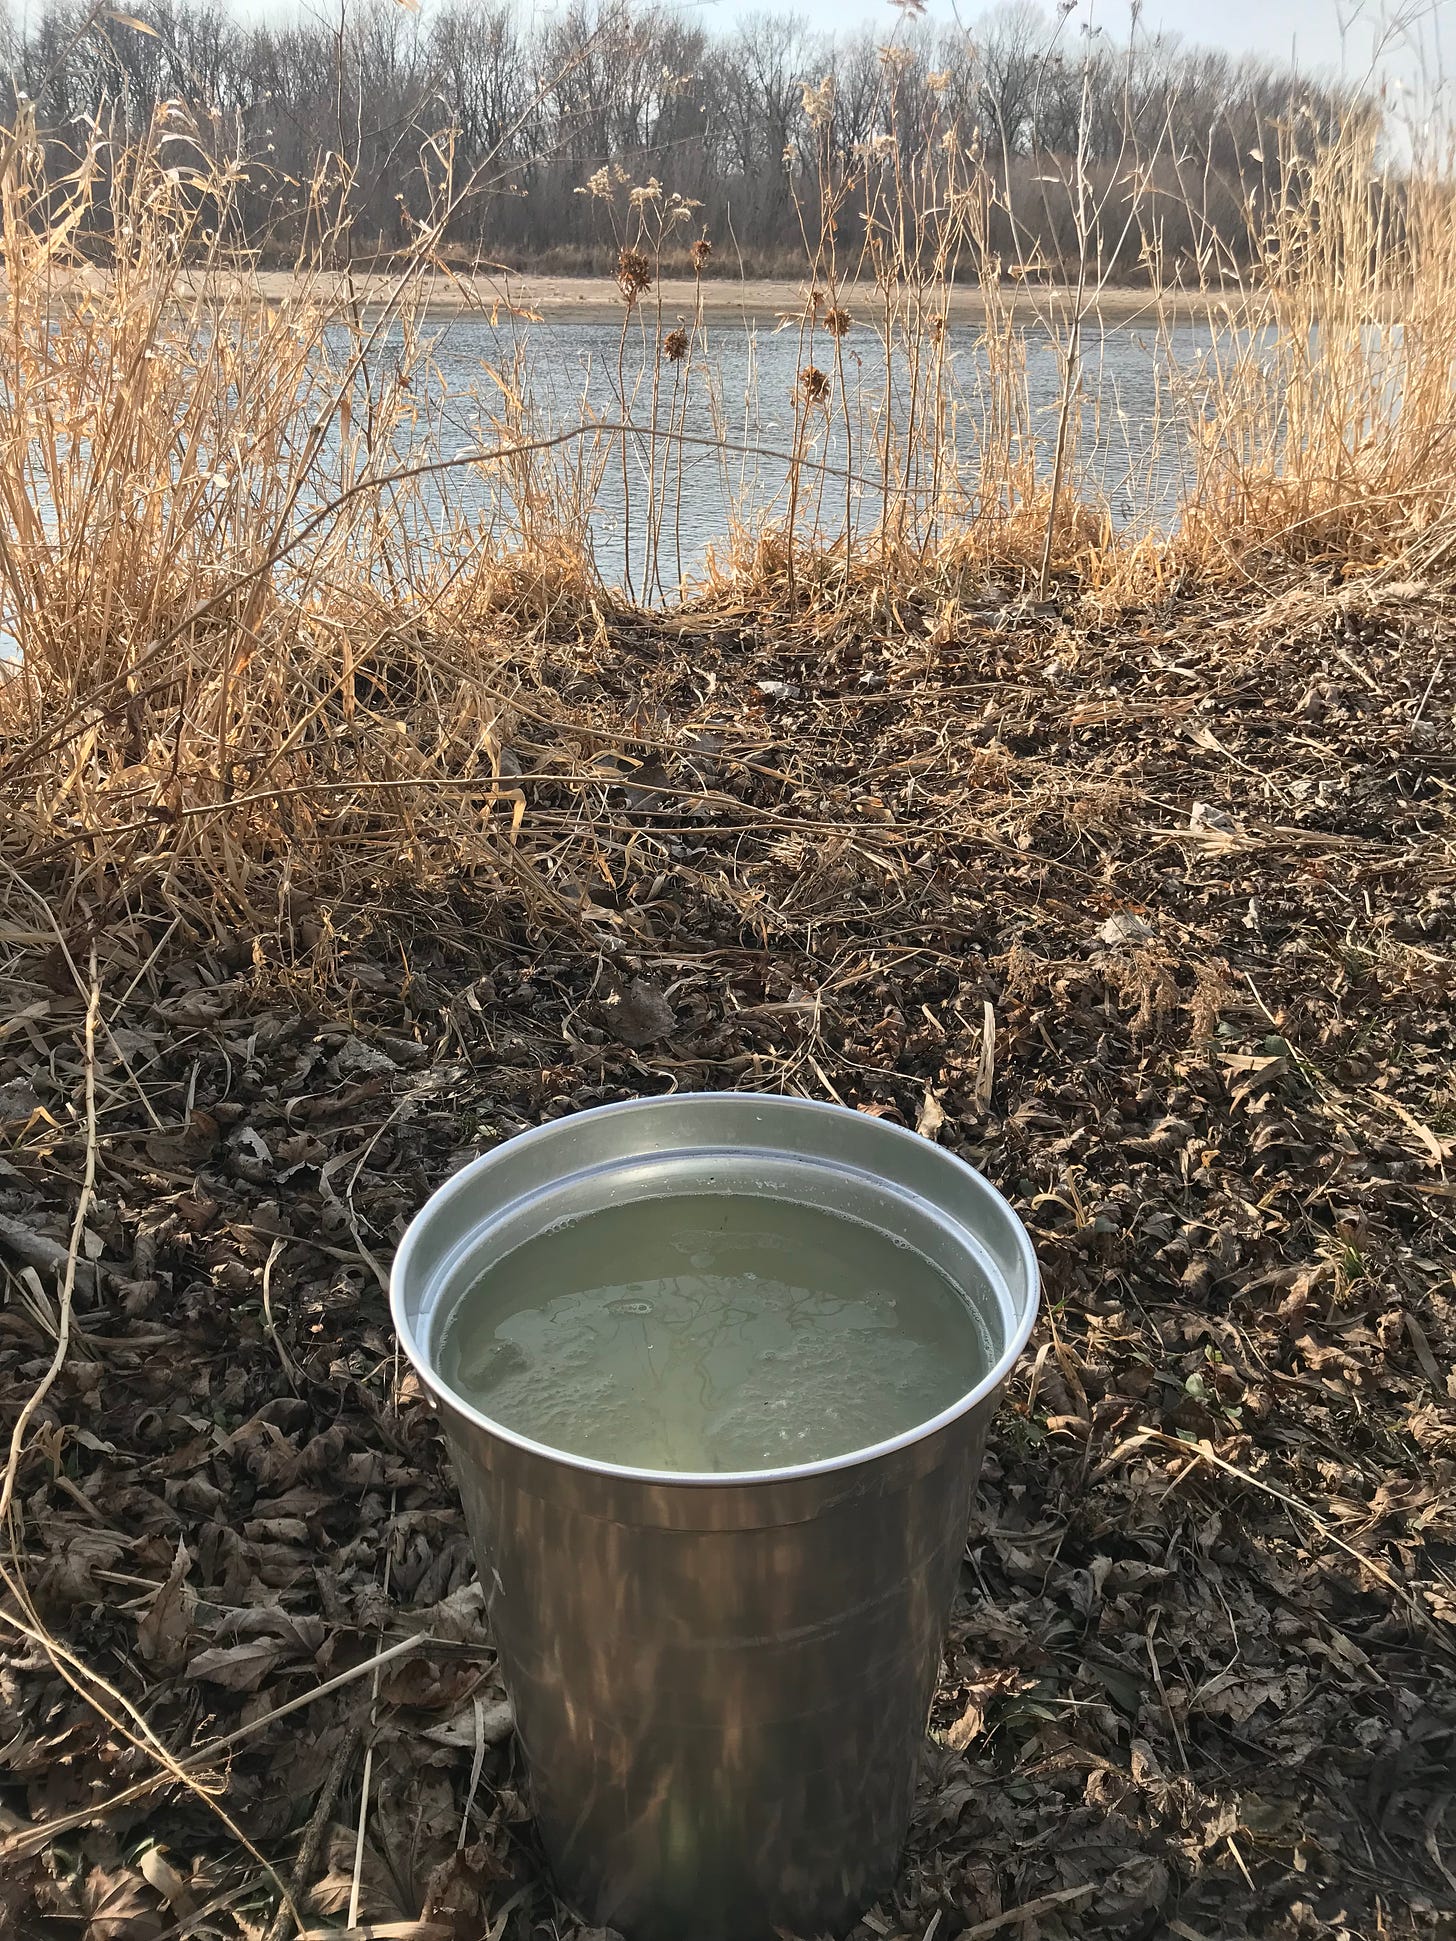 Bucket of maple sap sits in dry leaves near a river